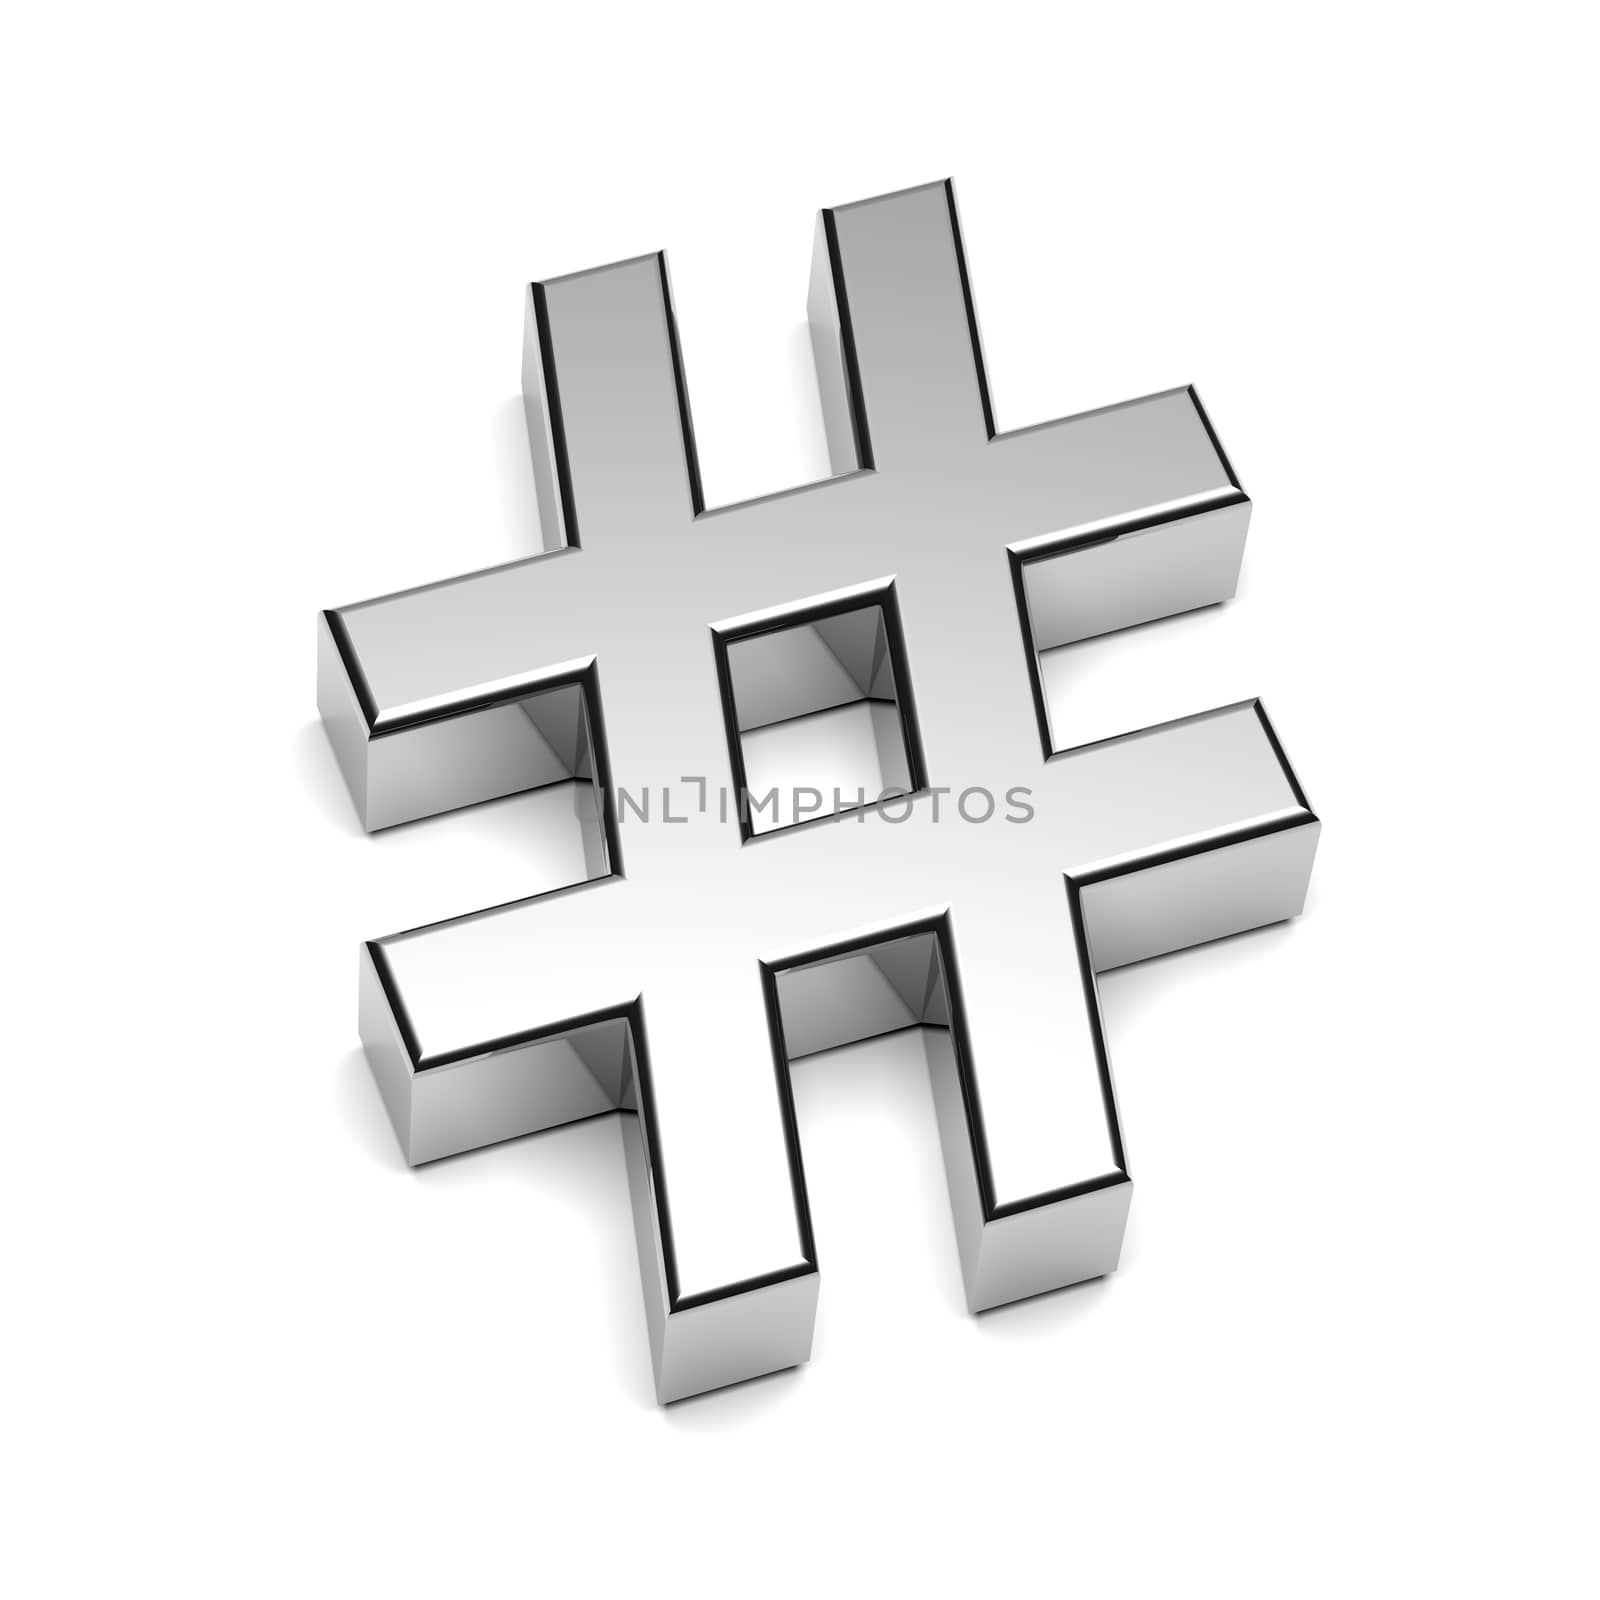 Hashtag Chrome Sign by make